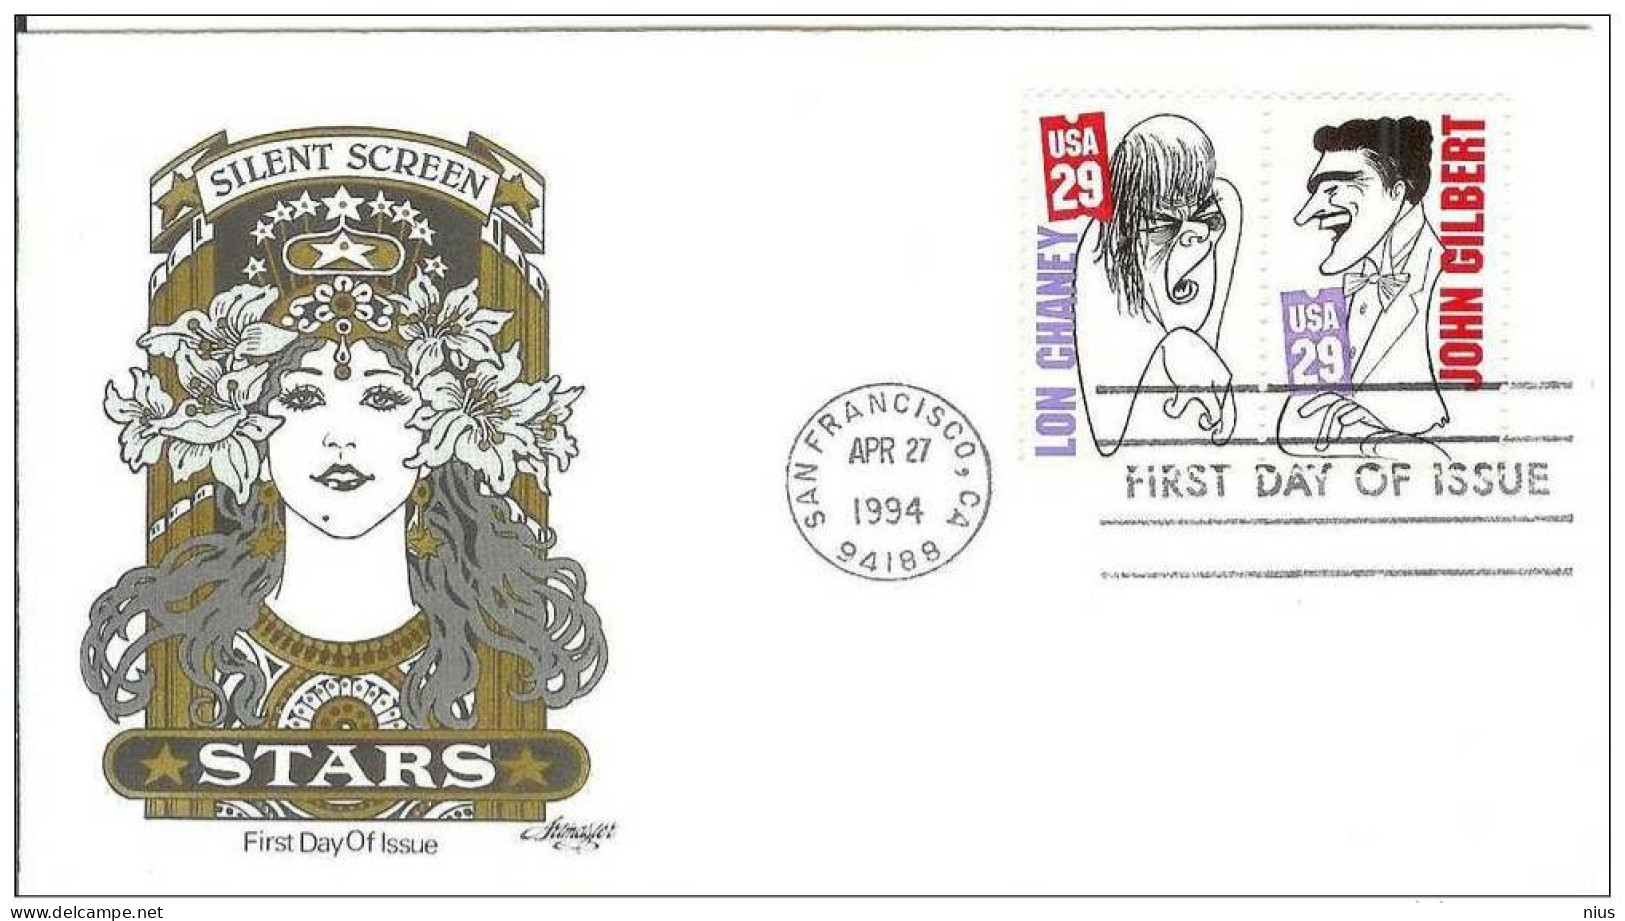 USA United States 1994 FDC Actor Lon Chaney John Gilbert Film Cinema Movie Comedy Silent Screen Comedians - 1991-2000